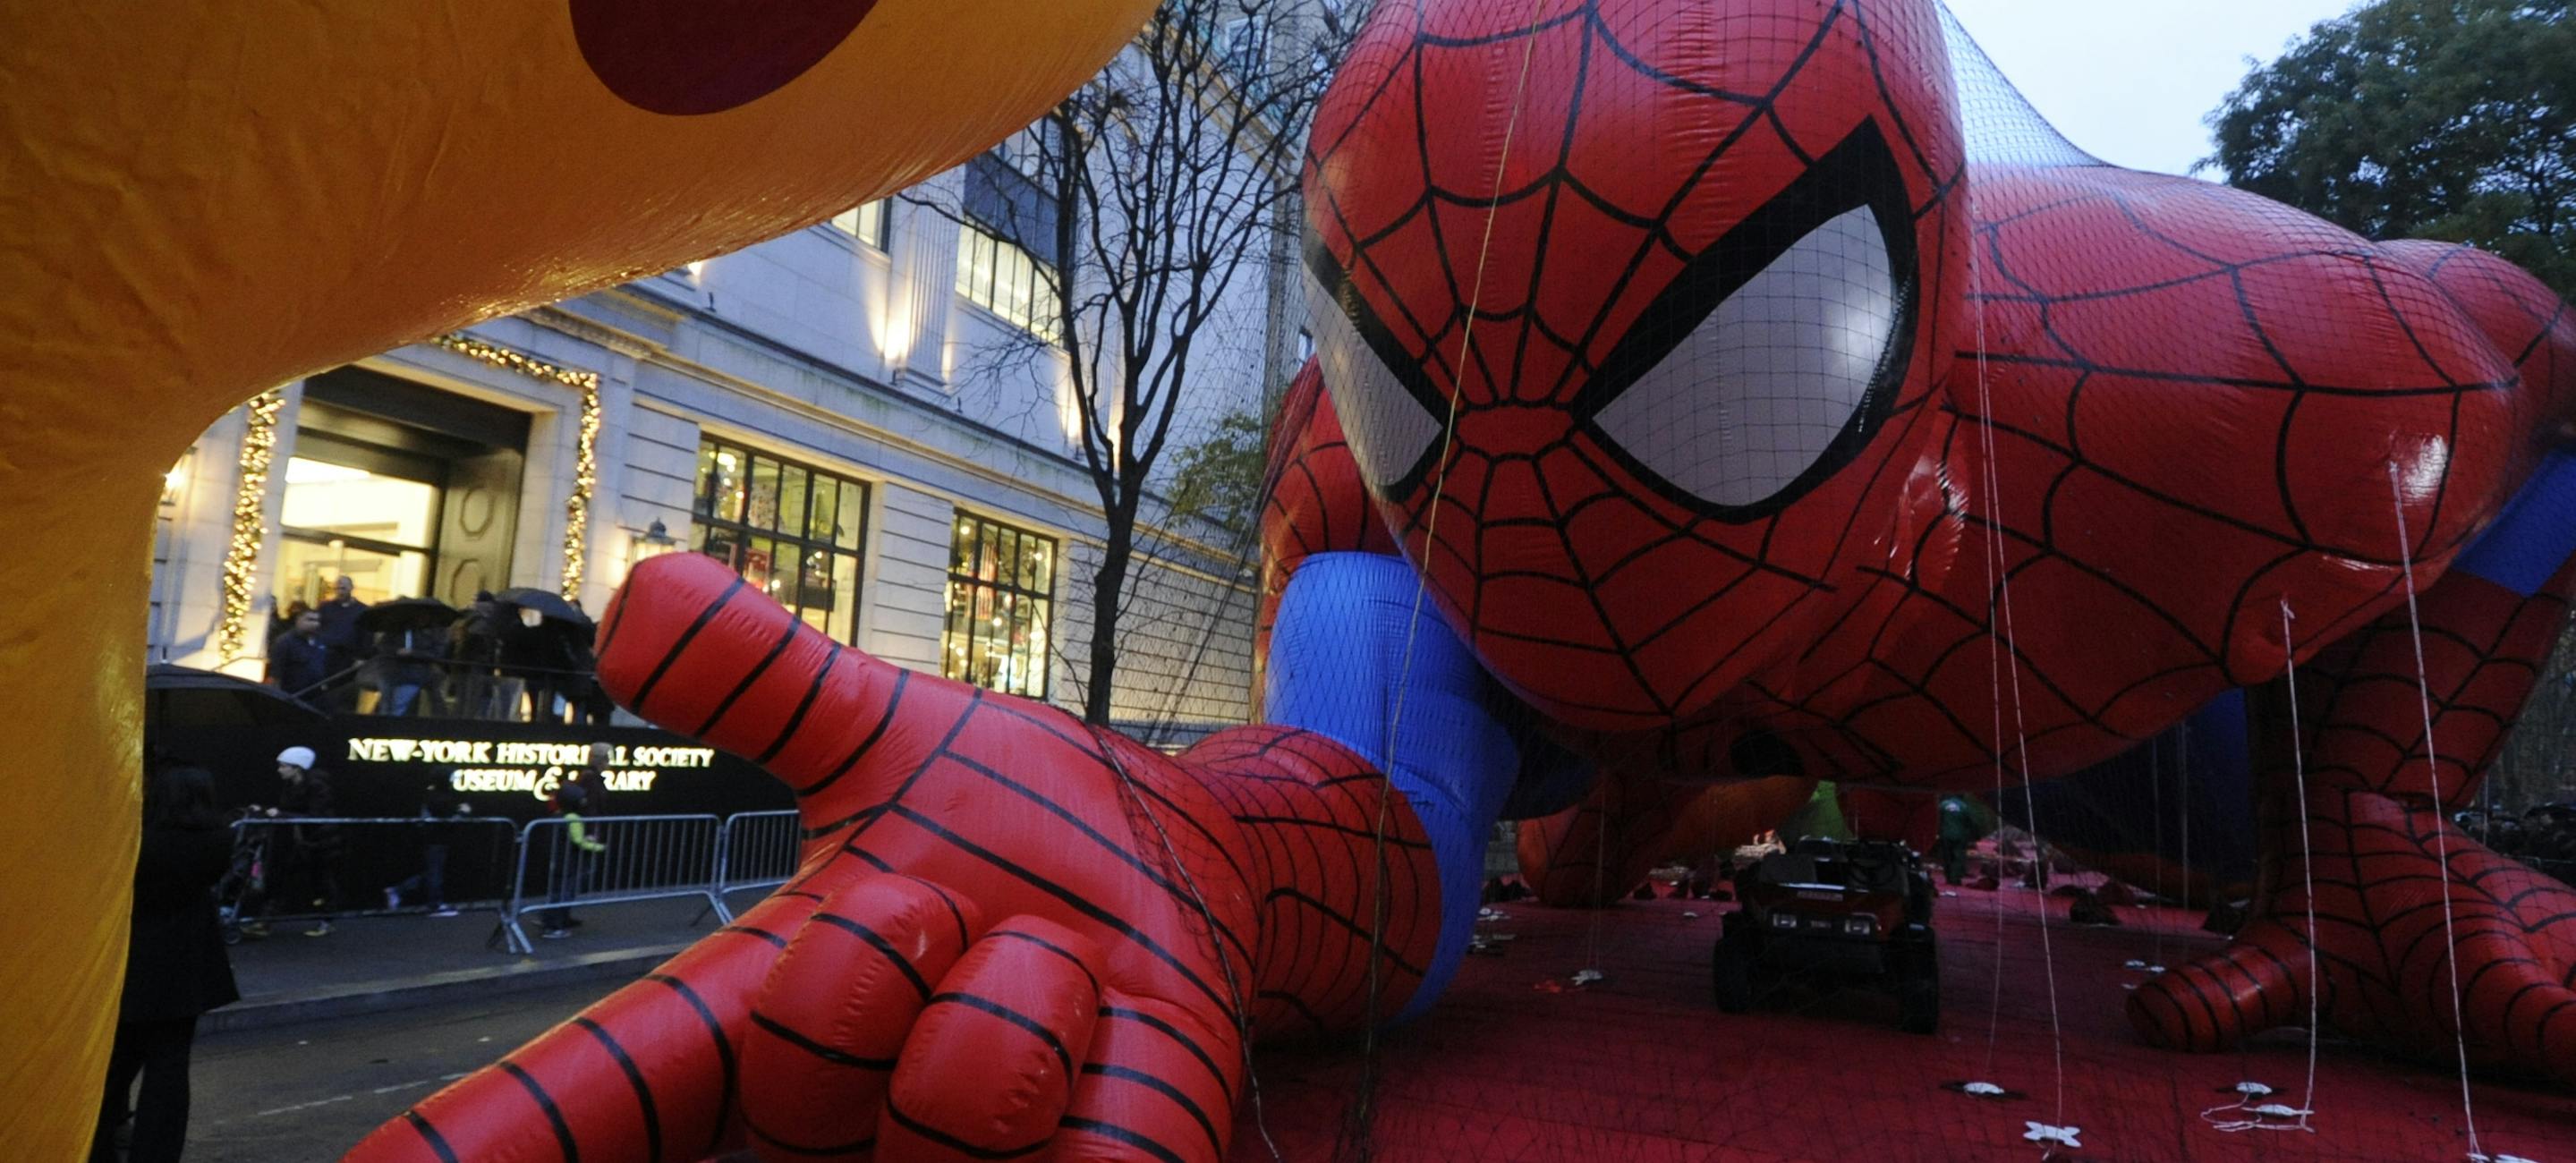 a balloon in the shape of Spider-Man is inflated in front of the New-York Historical Society building before the Macy's Thanksgiving Day Parade